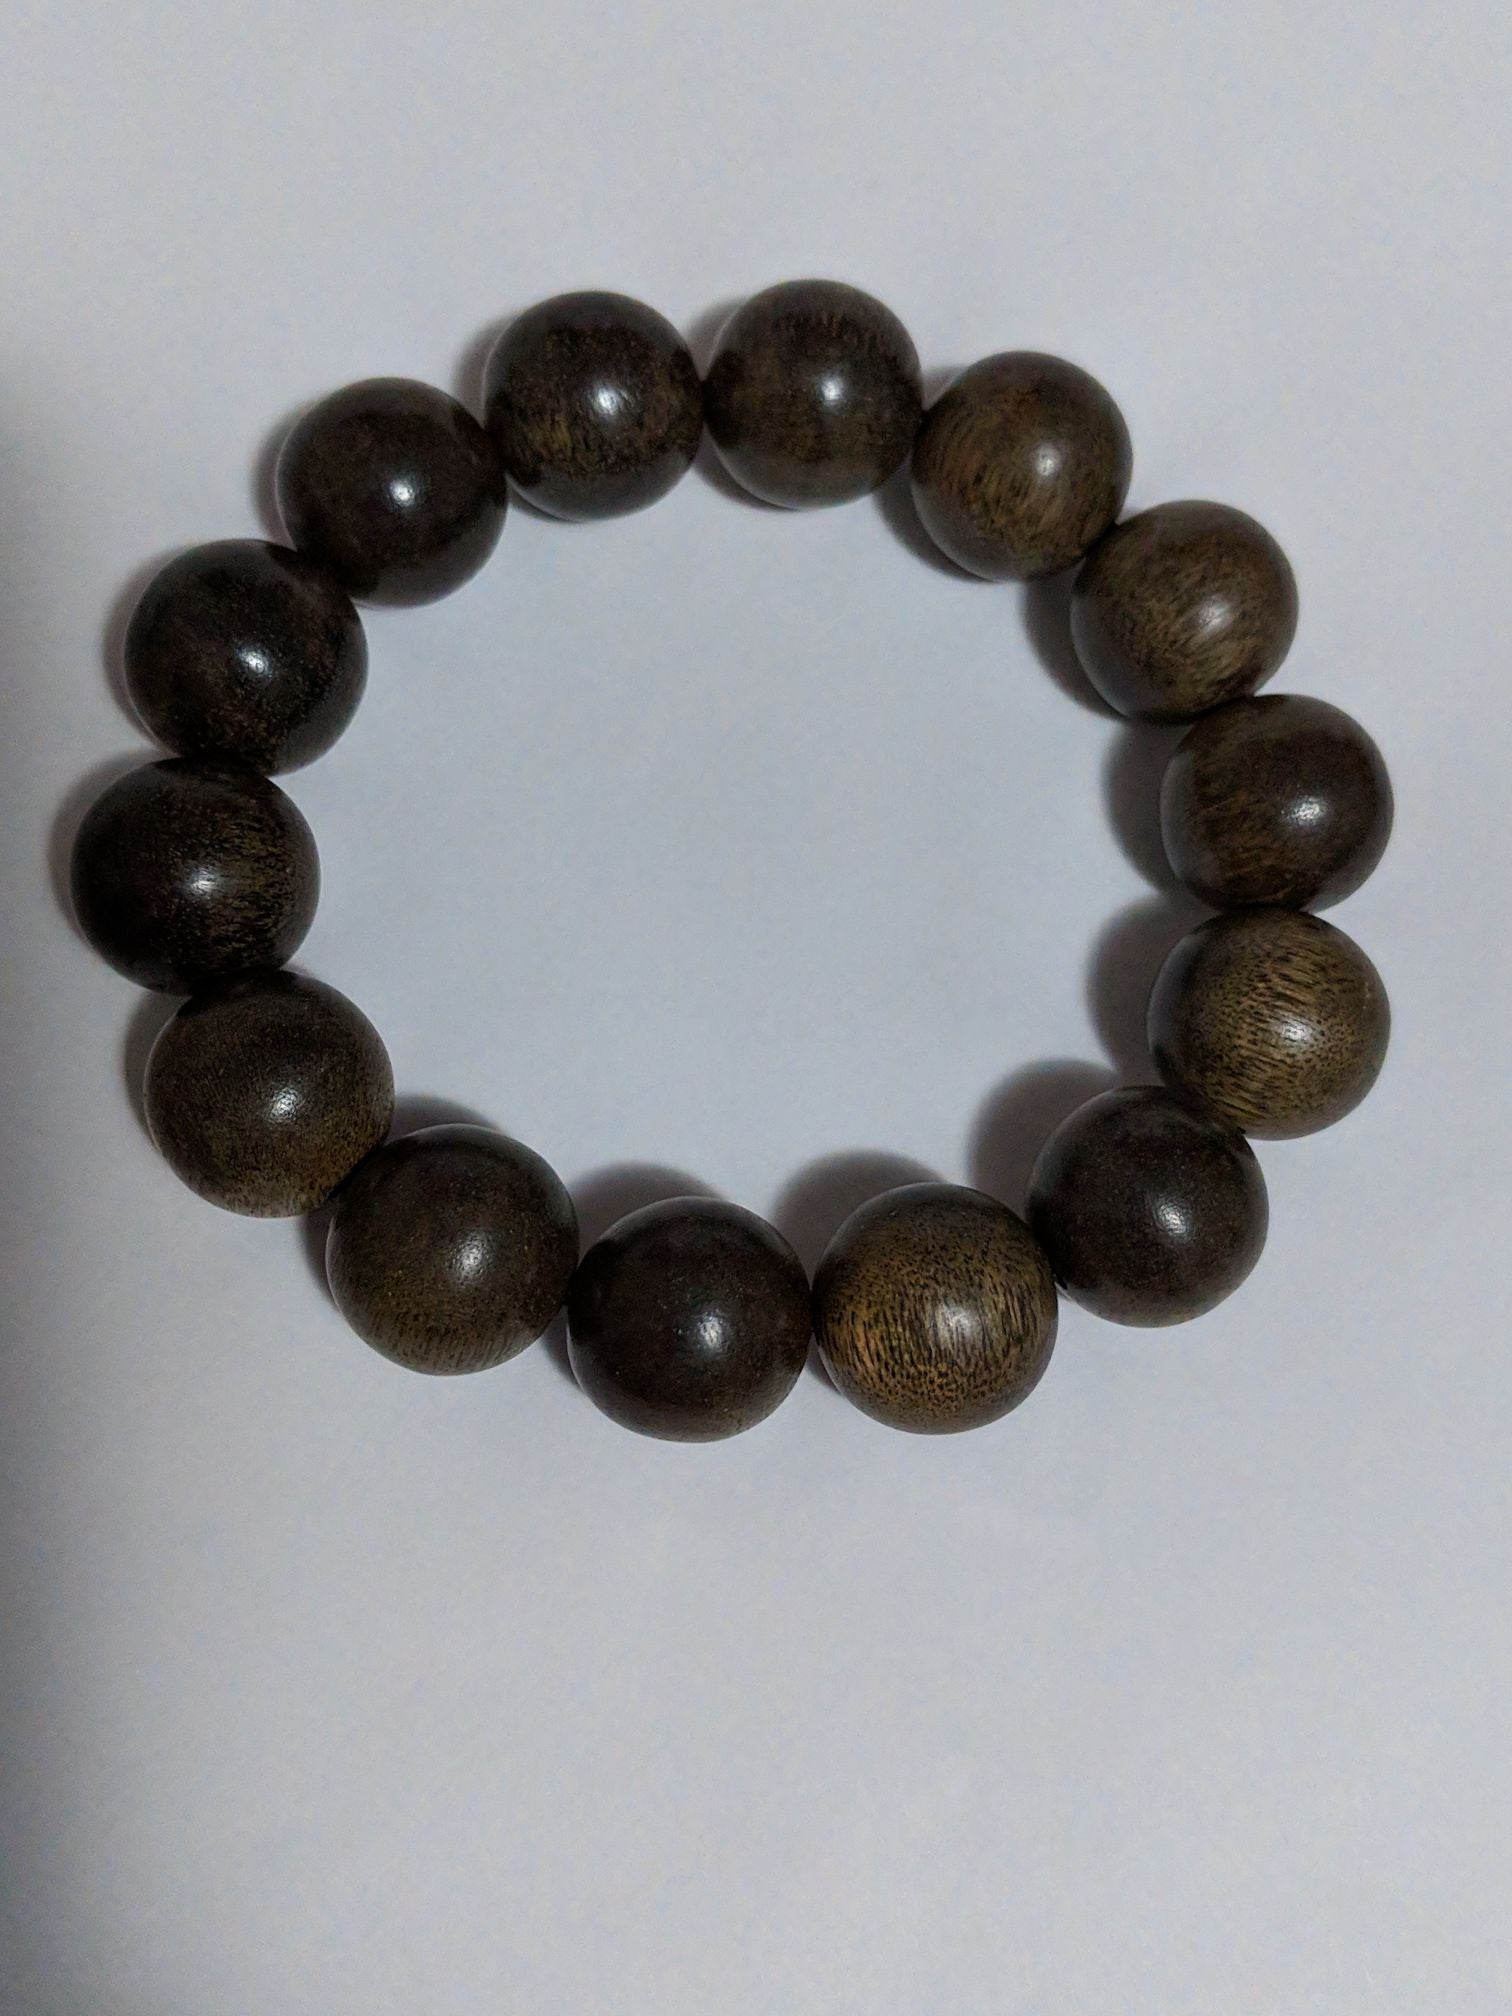 SOLD Wild Agarwood Bracelet made from heart wood 16mm 14 beads 32g - The Moonless -